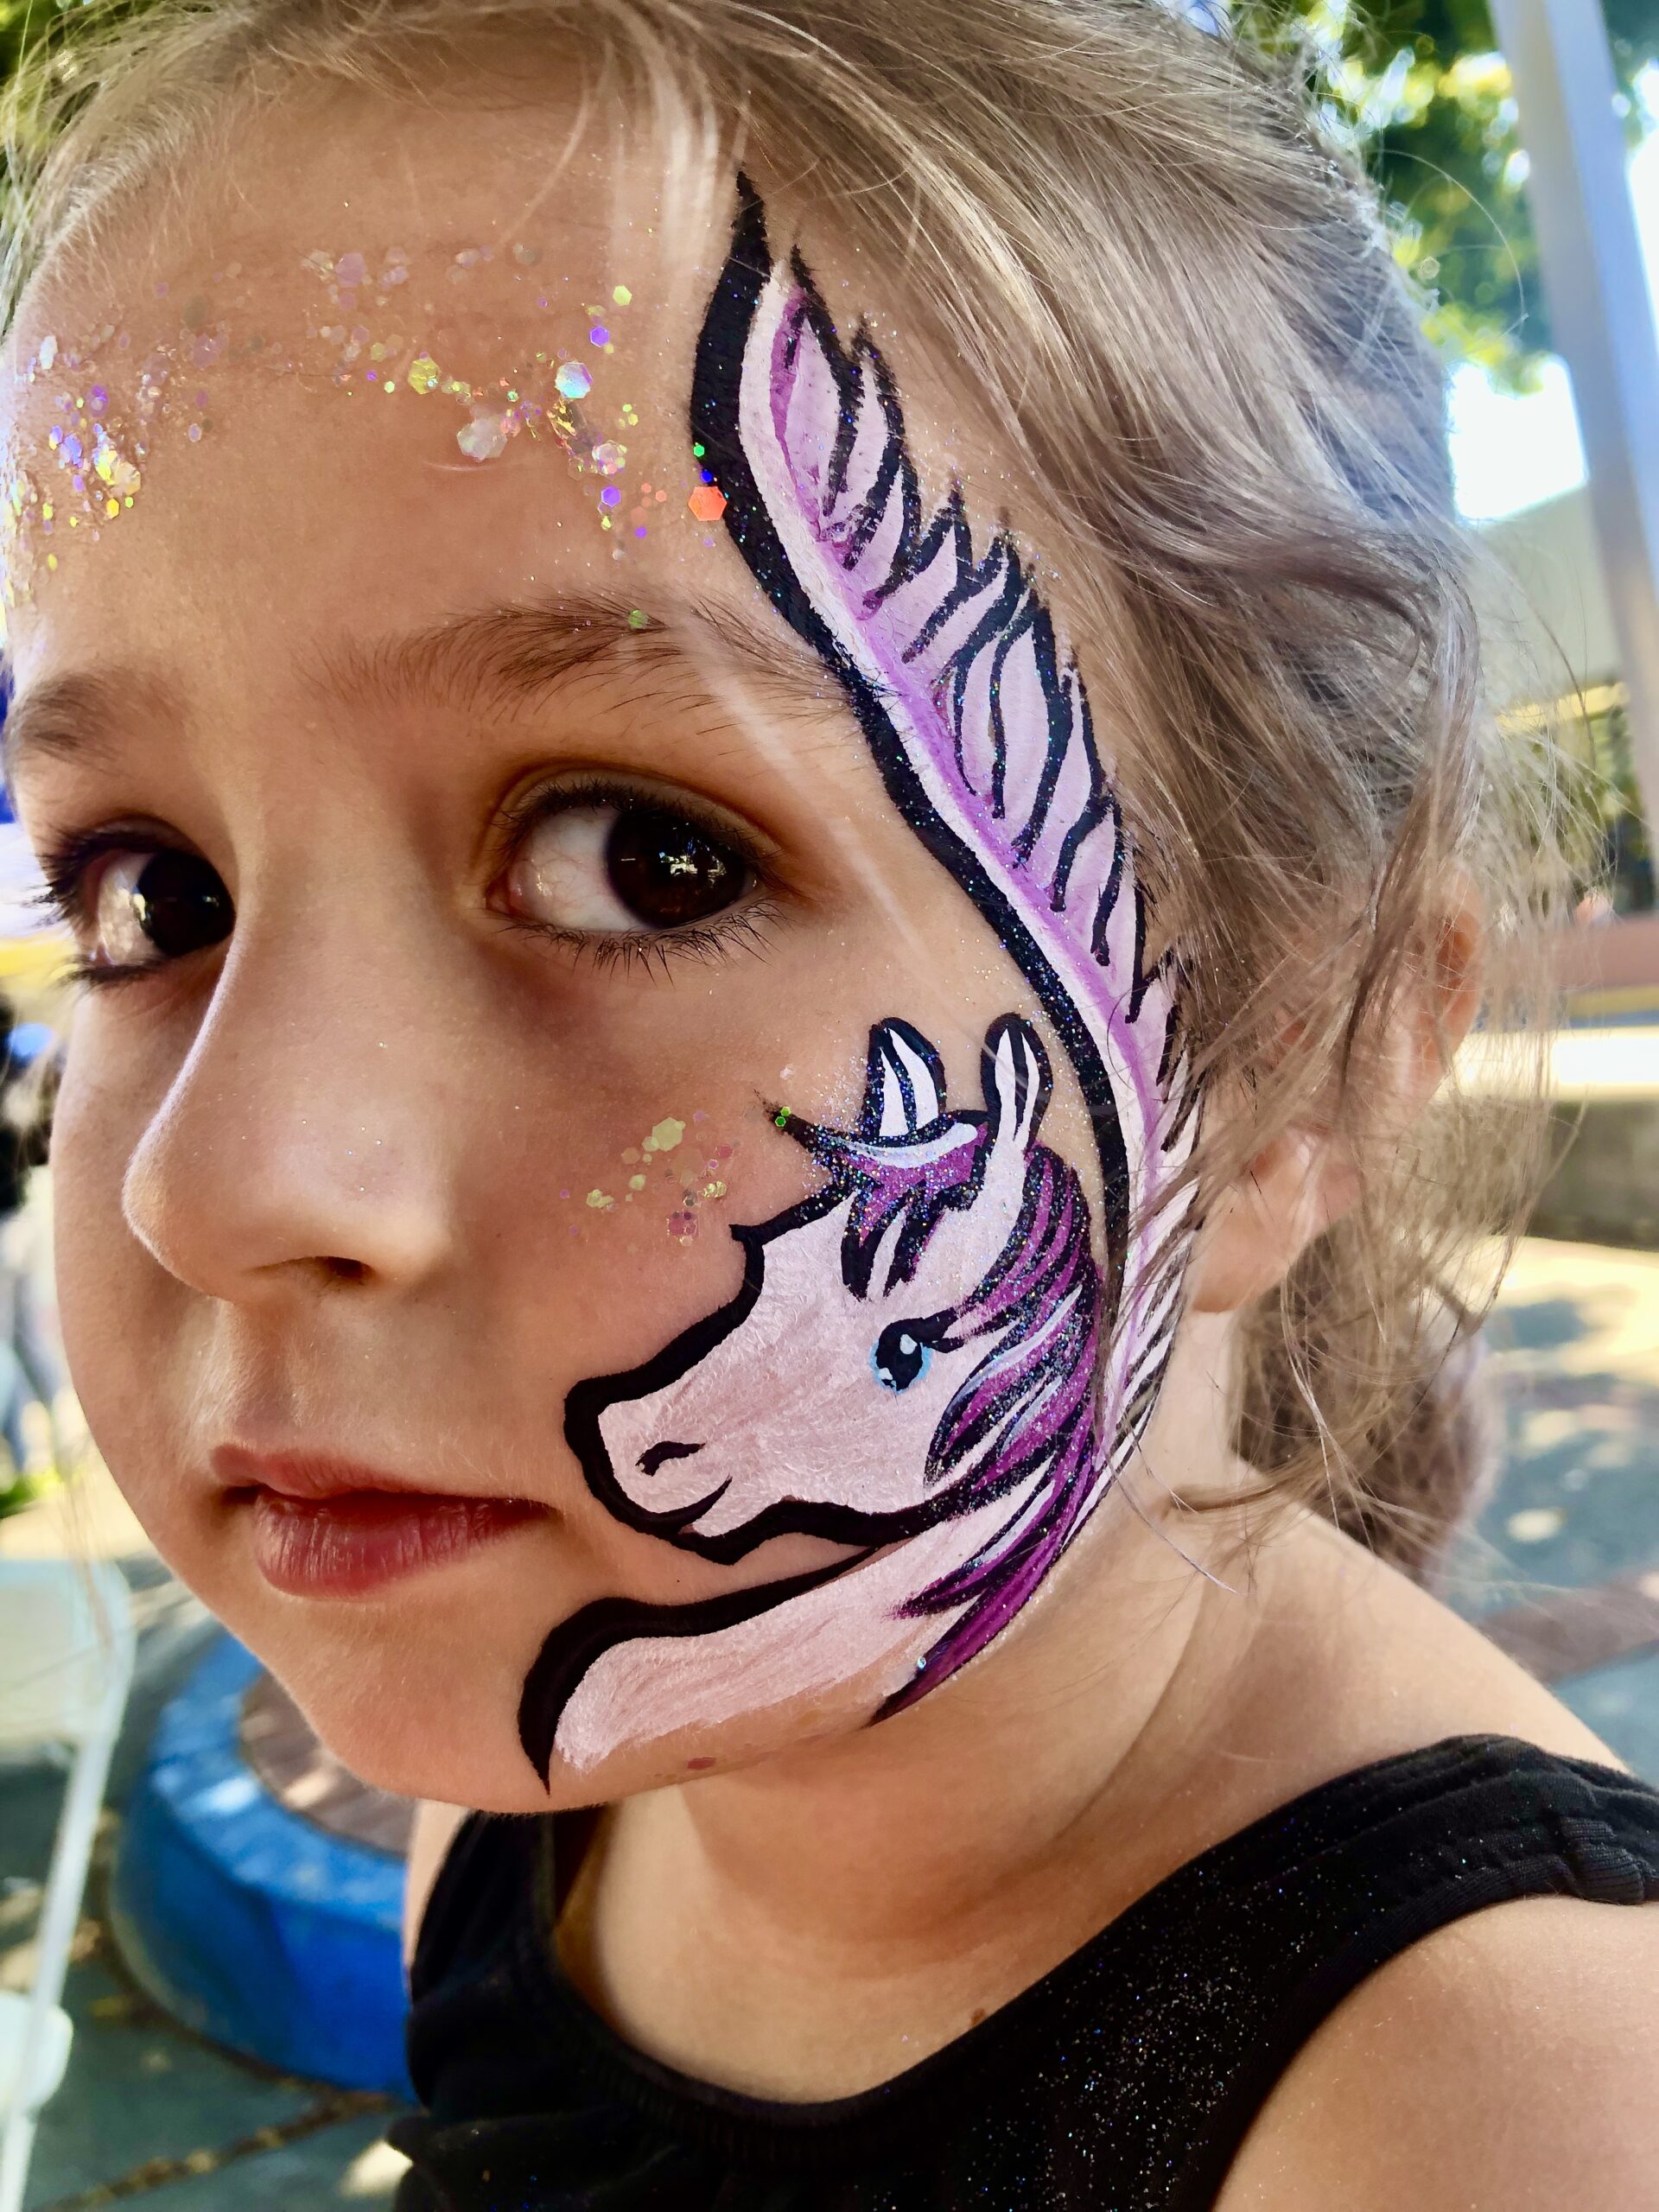 A child with a pink glittery pegasus design on her face